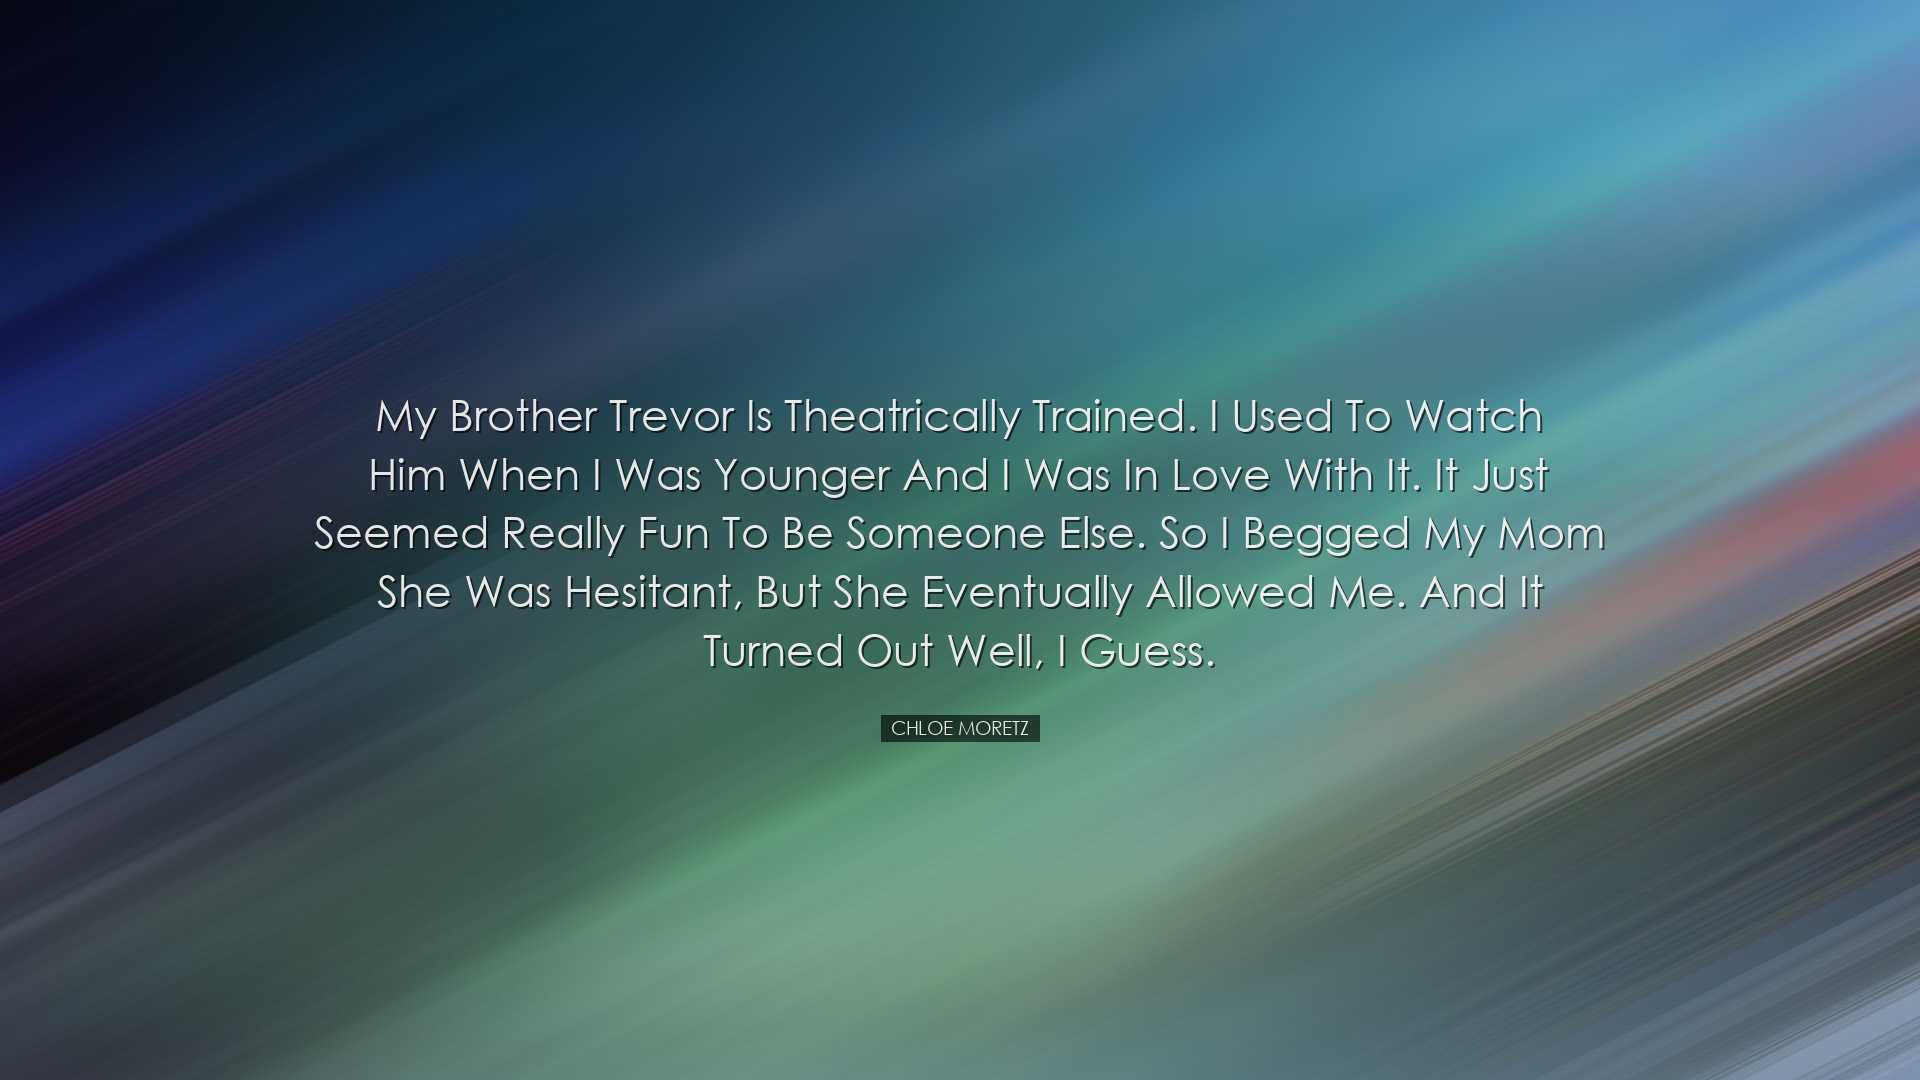 My brother Trevor is theatrically trained. I used to watch him whe